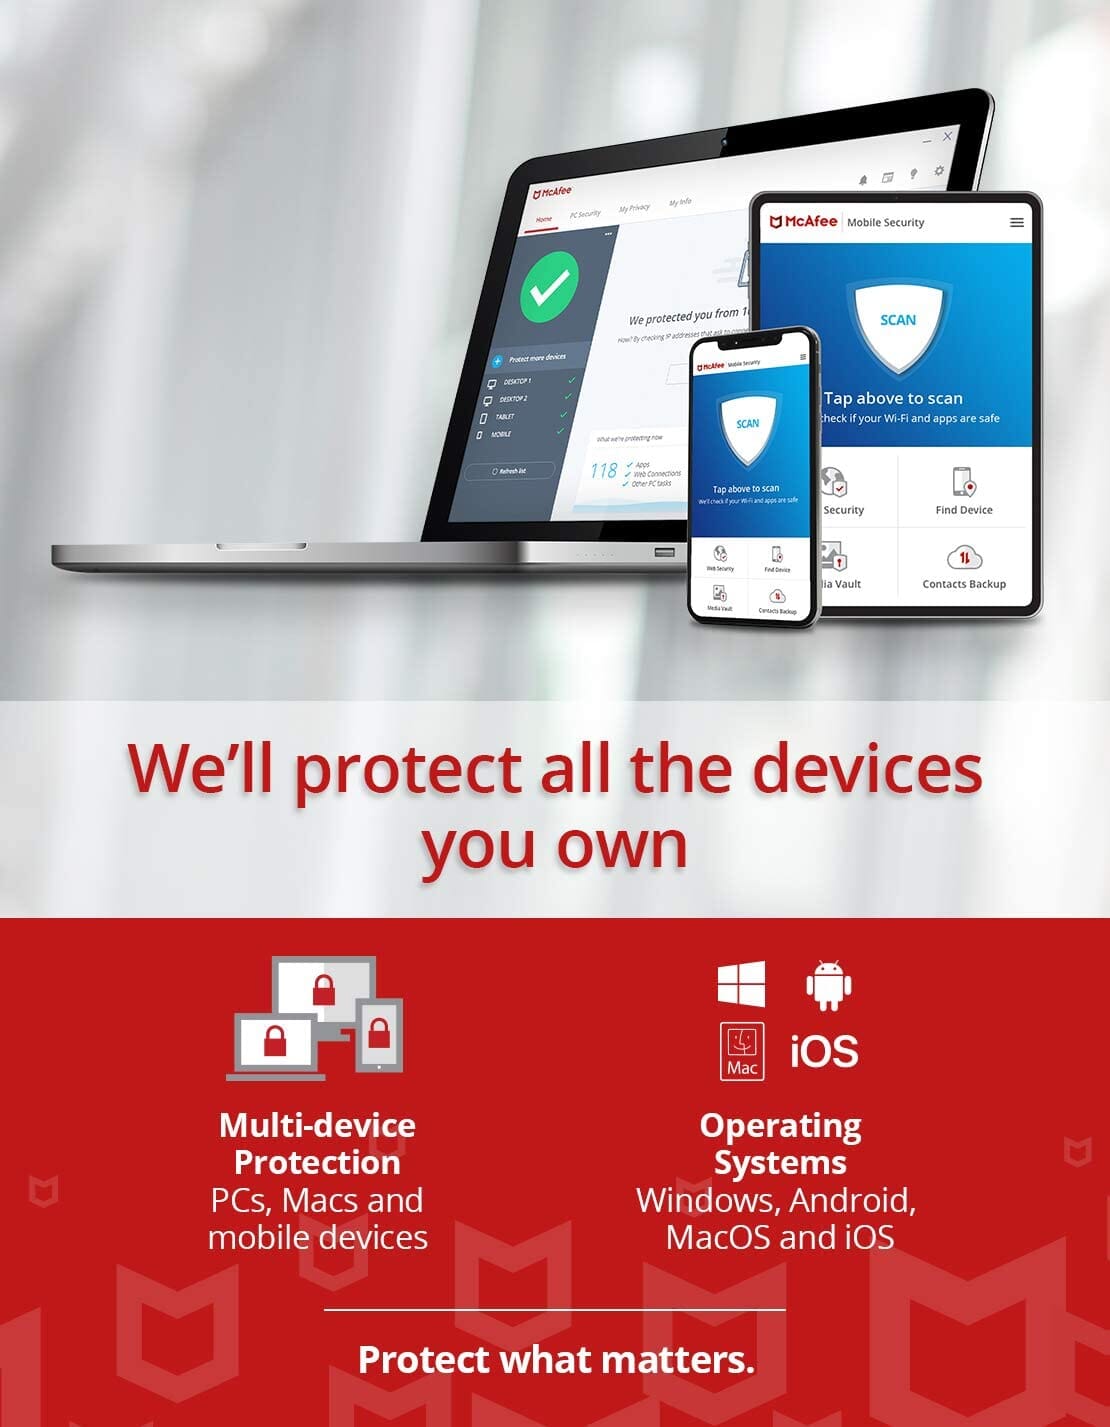 mcafee total protection 2020 5 devices